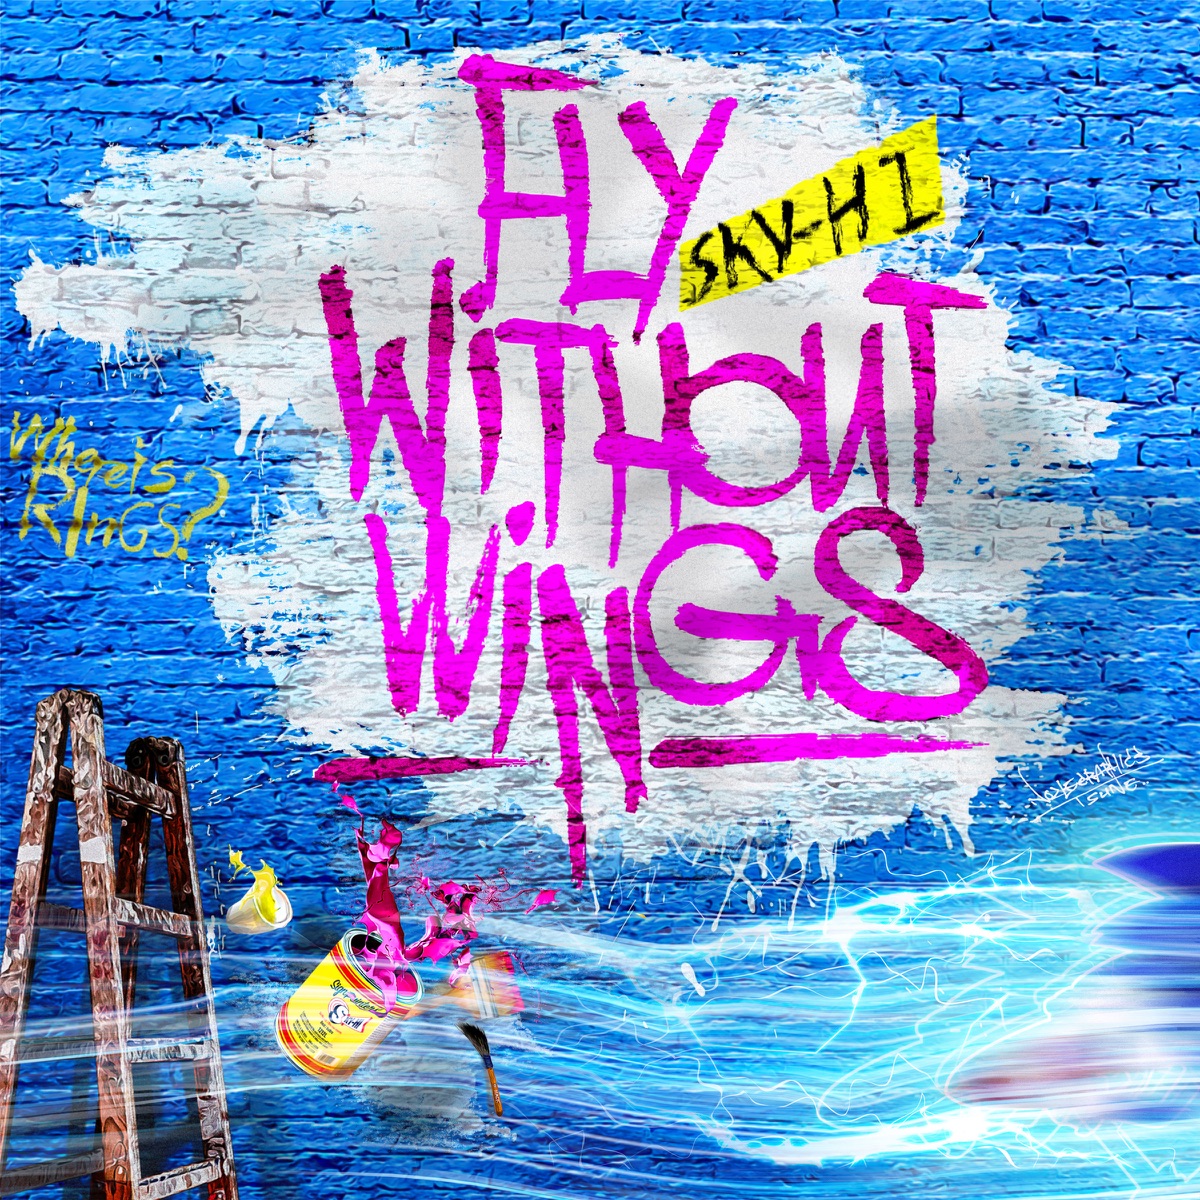 『SKY-HI - Fly Without Wings』収録の『Fly Without Wings』ジャケット